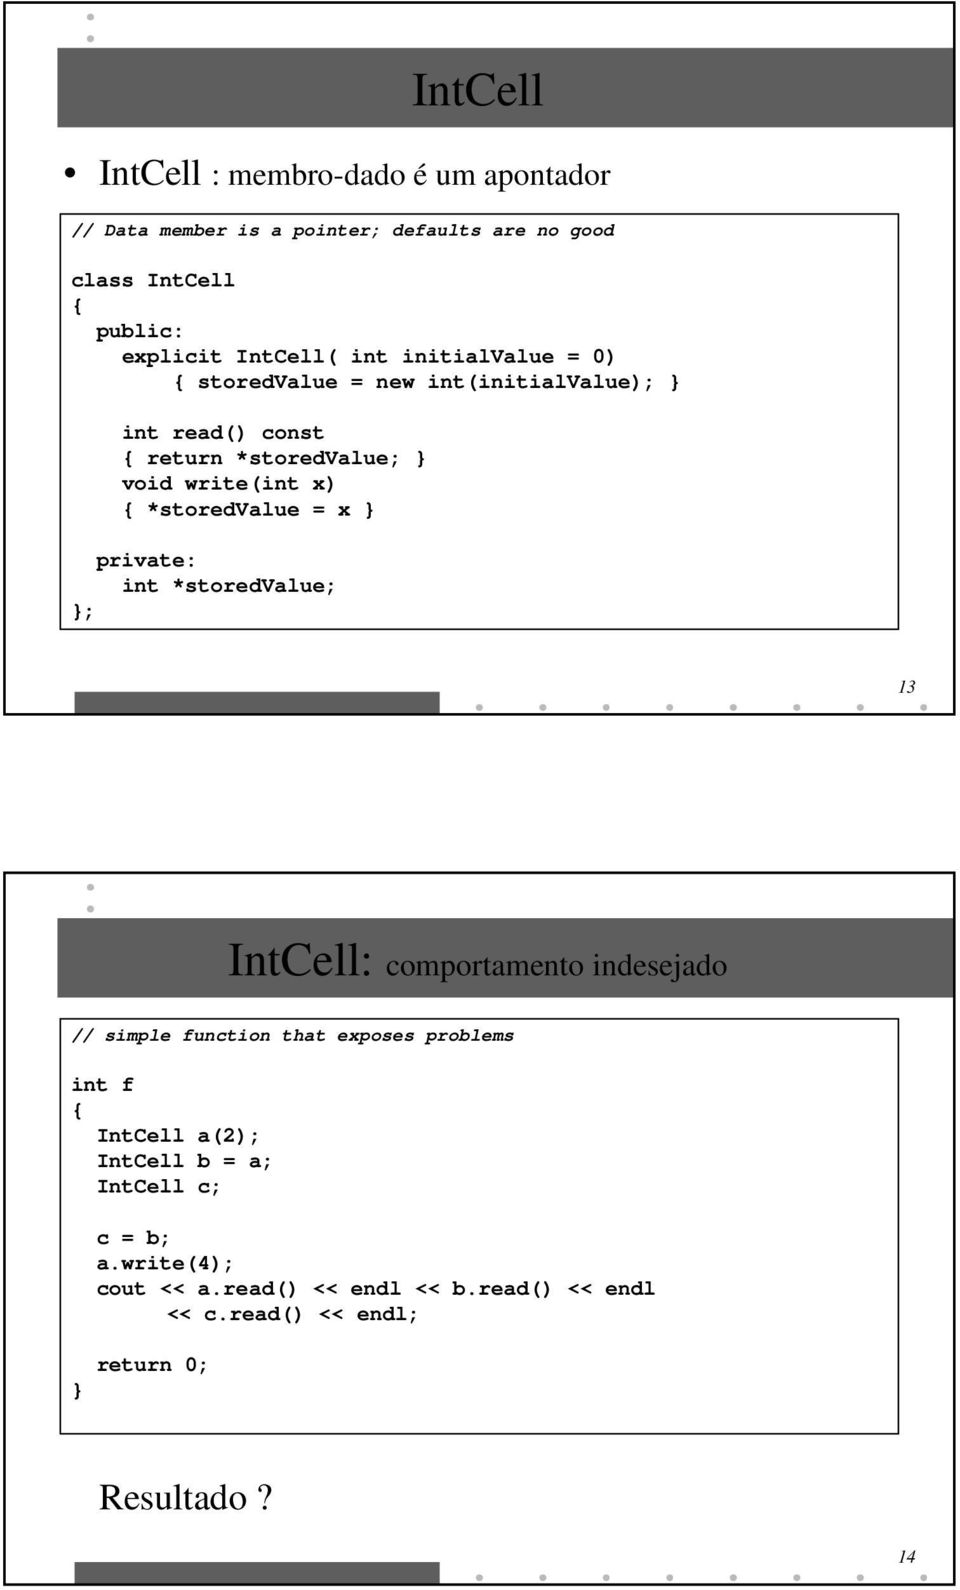 = x int *storedvalue; 13 IntCell: comportamento indesejado // simple function that exposes problems int f IntCell a(2); IntCell